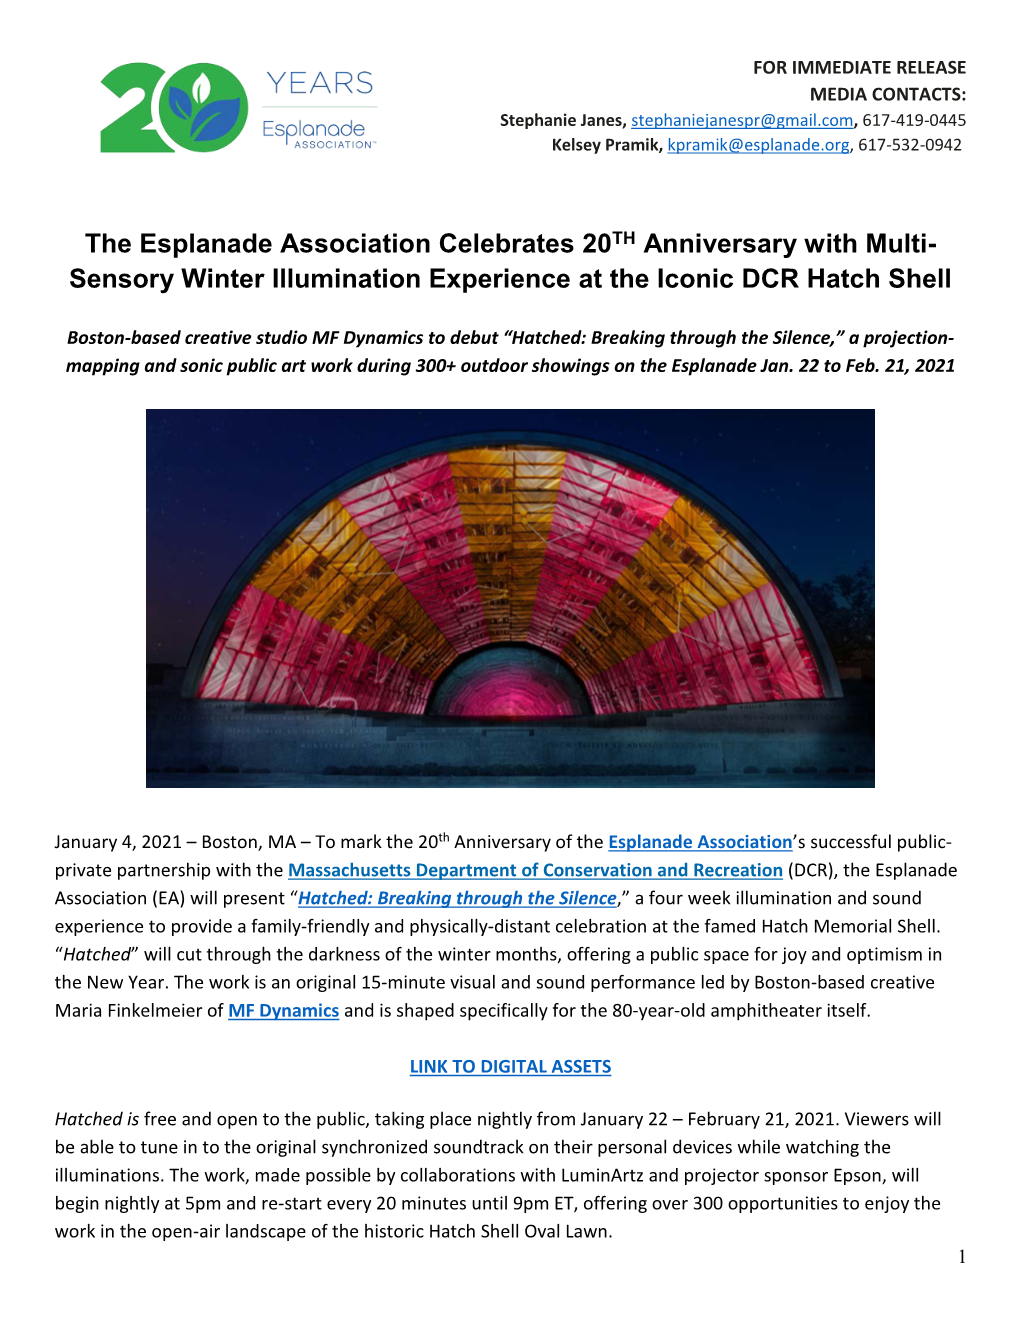 The Esplanade Association Celebrates 20TH Anniversary with Multi- Sensory Winter Illumination Experience at the Iconic DCR Hatch Shell